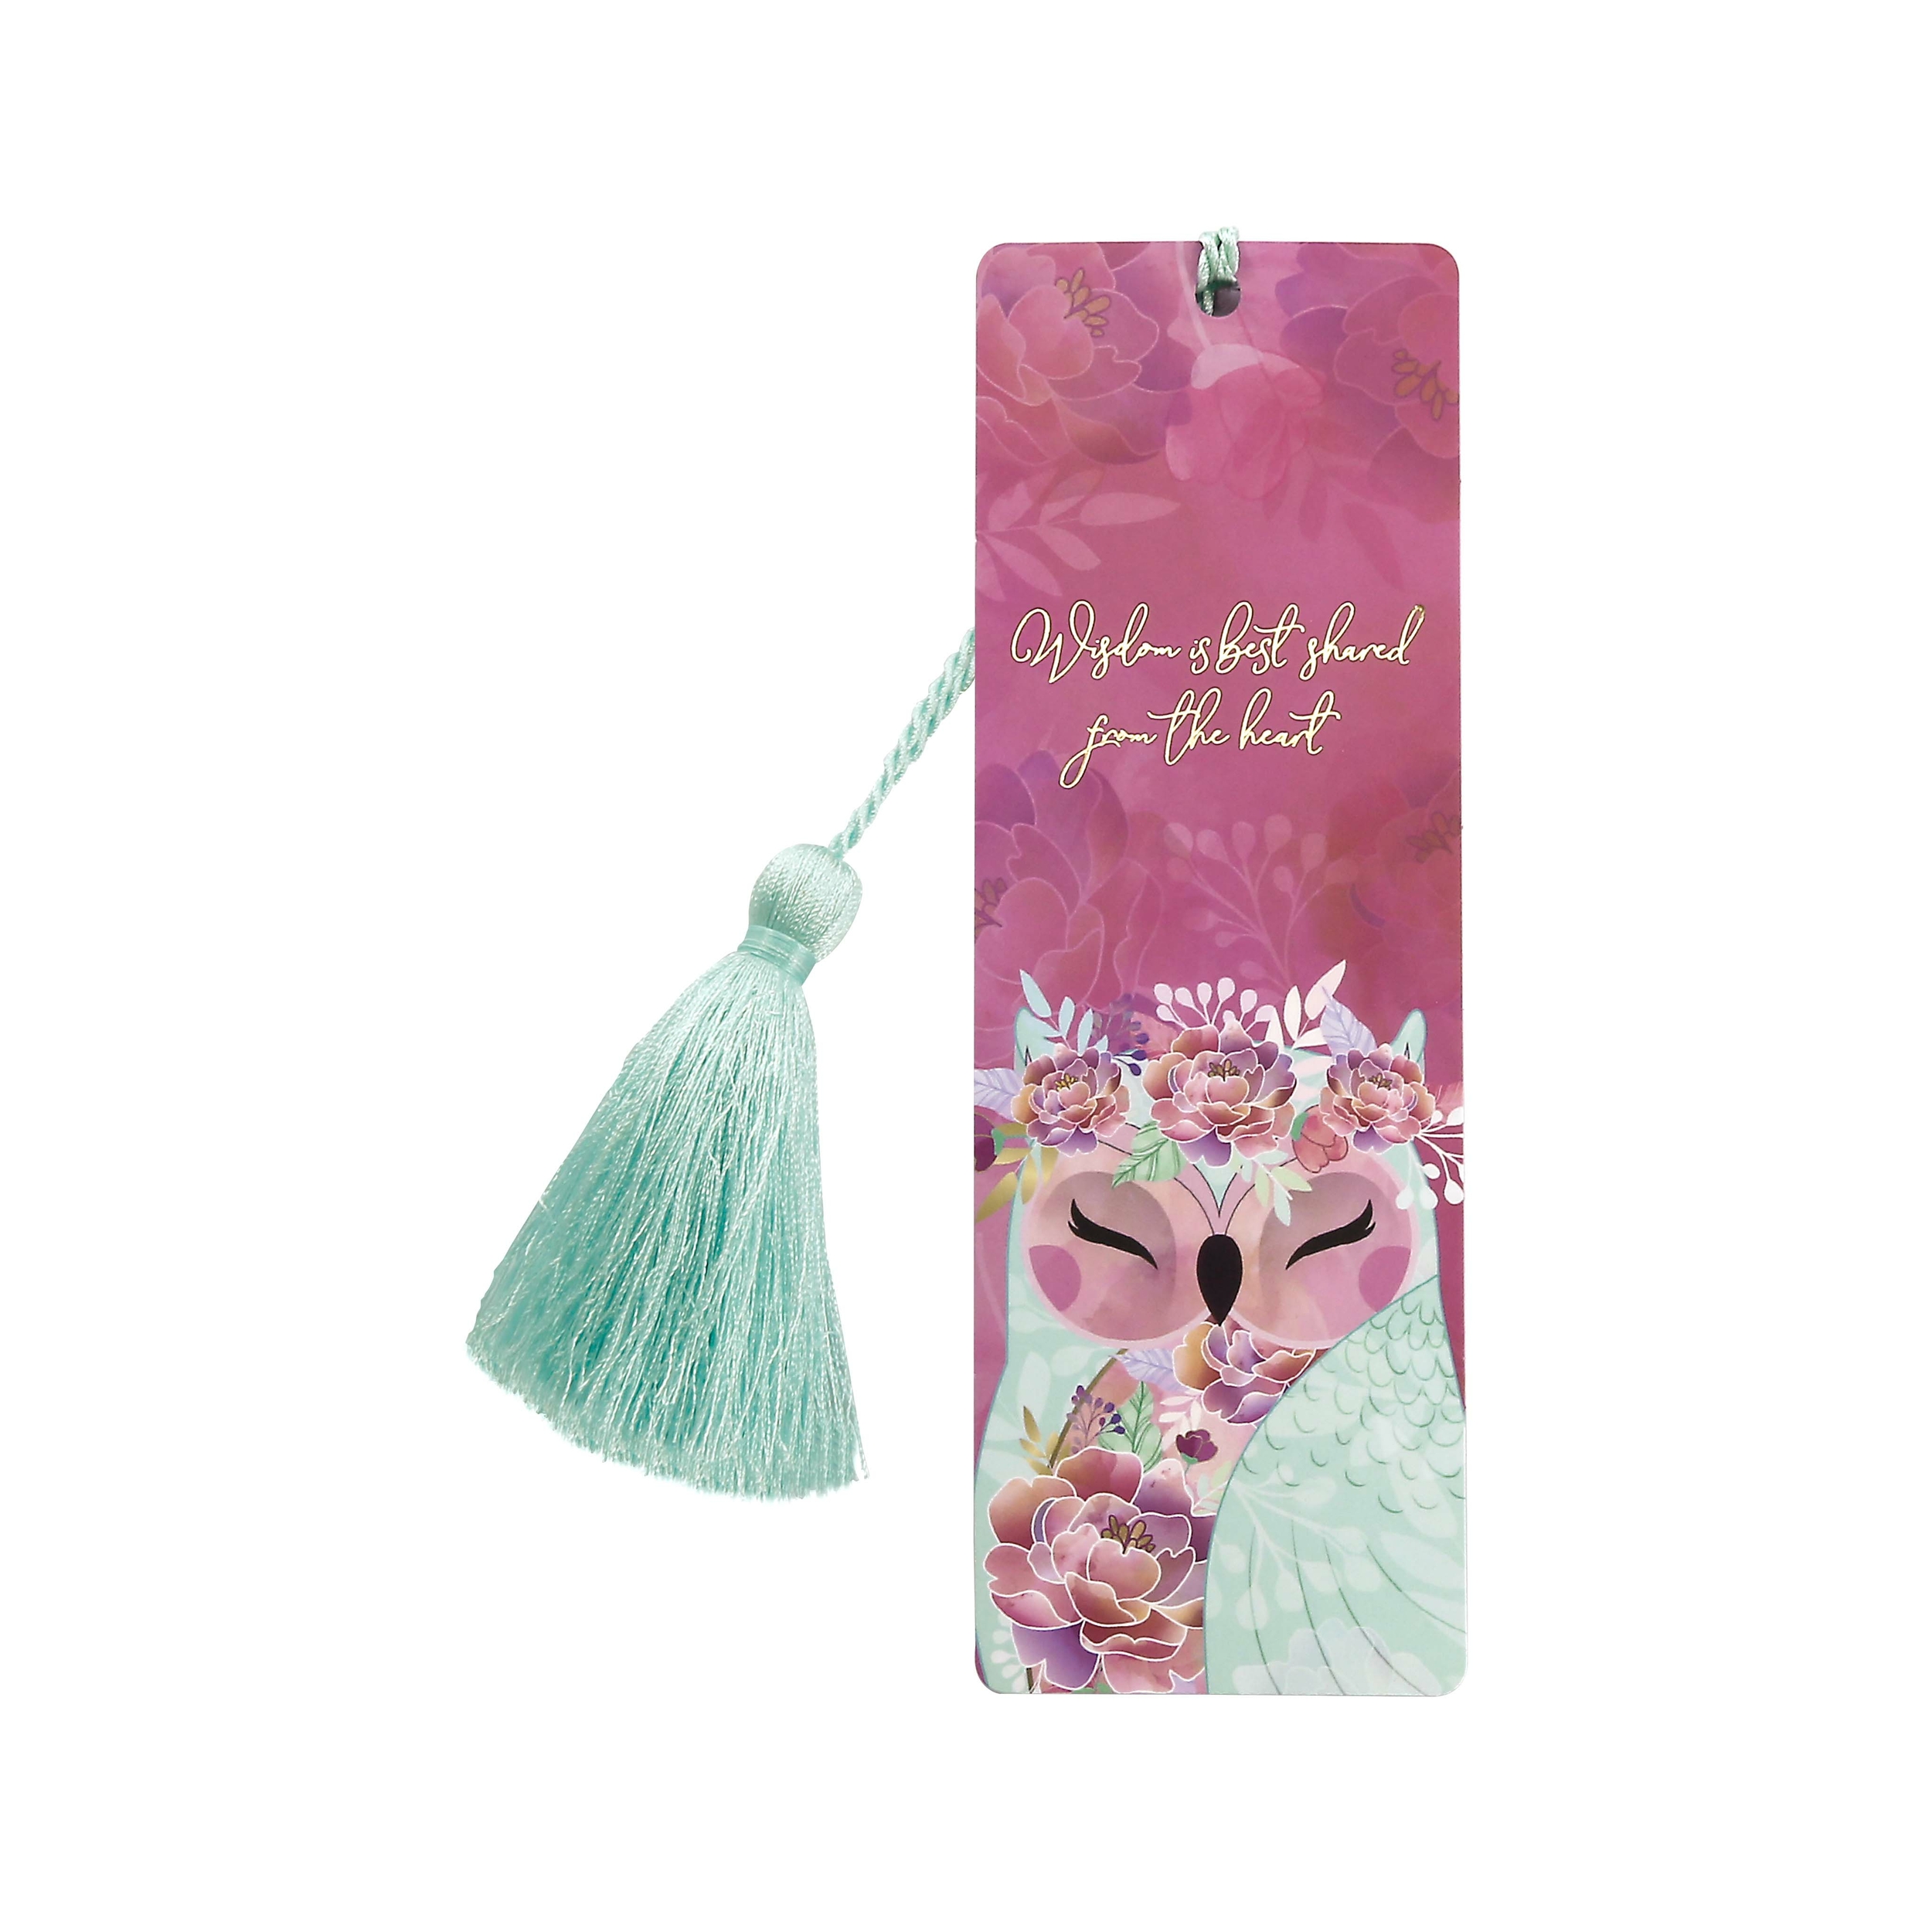 Marque Page Chouette Wise Wings Gentilesse lulu shop